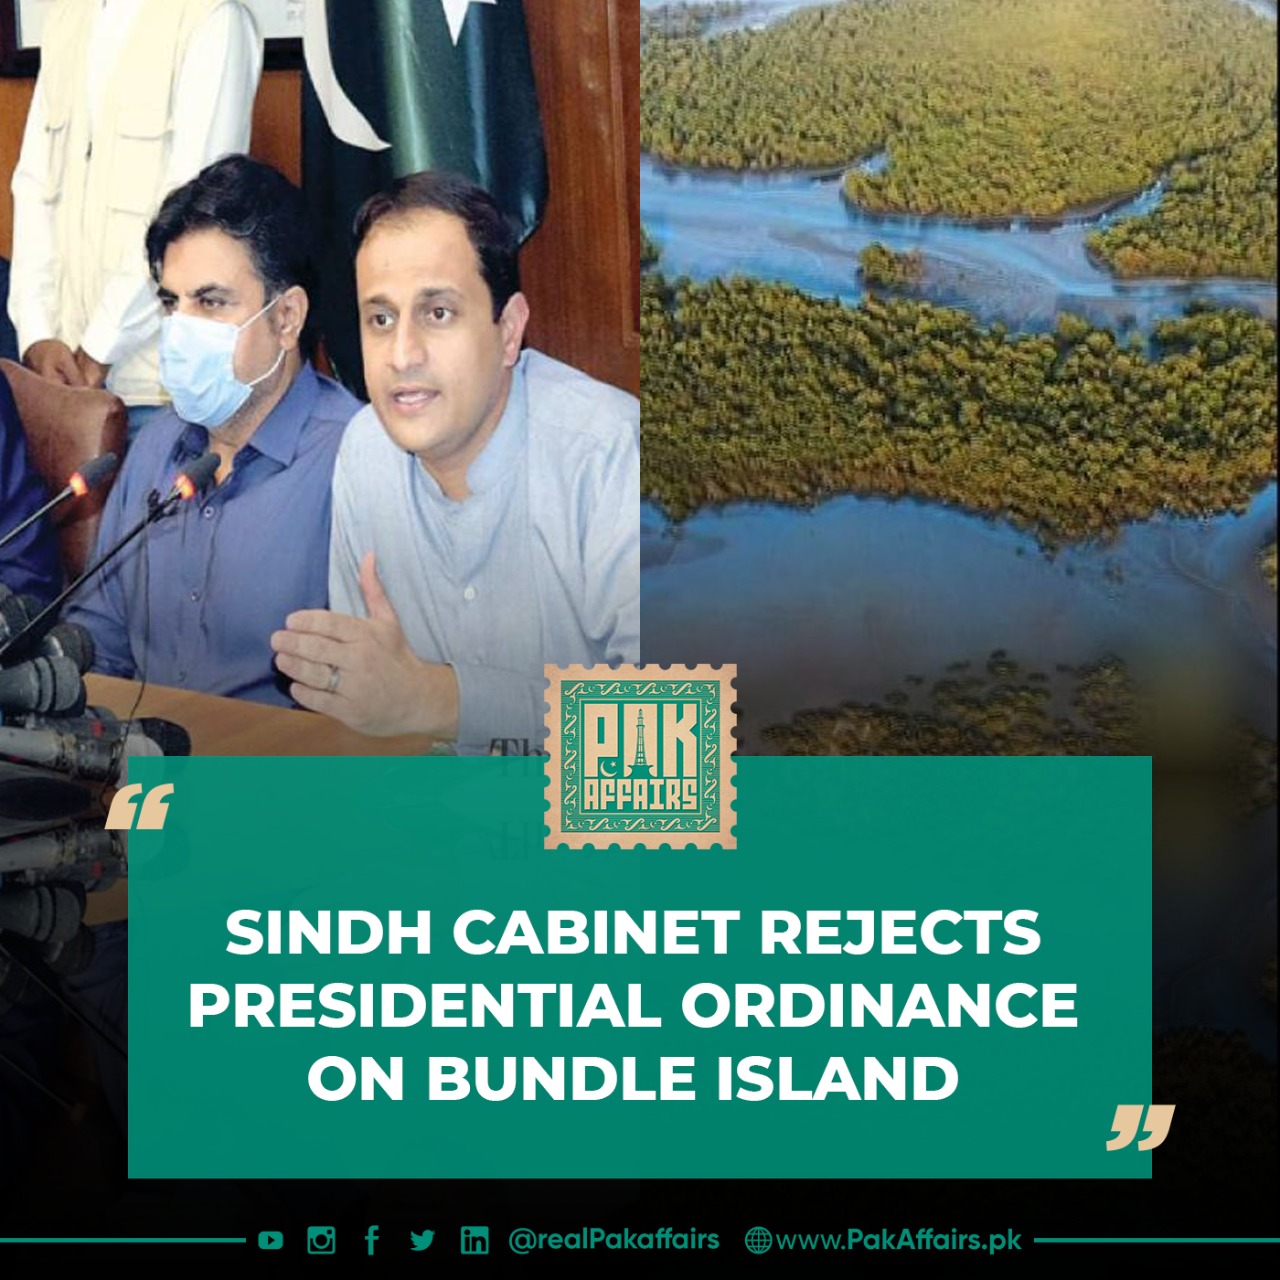 Sindh cabinet rejects presidential ordinance on Bundle Island